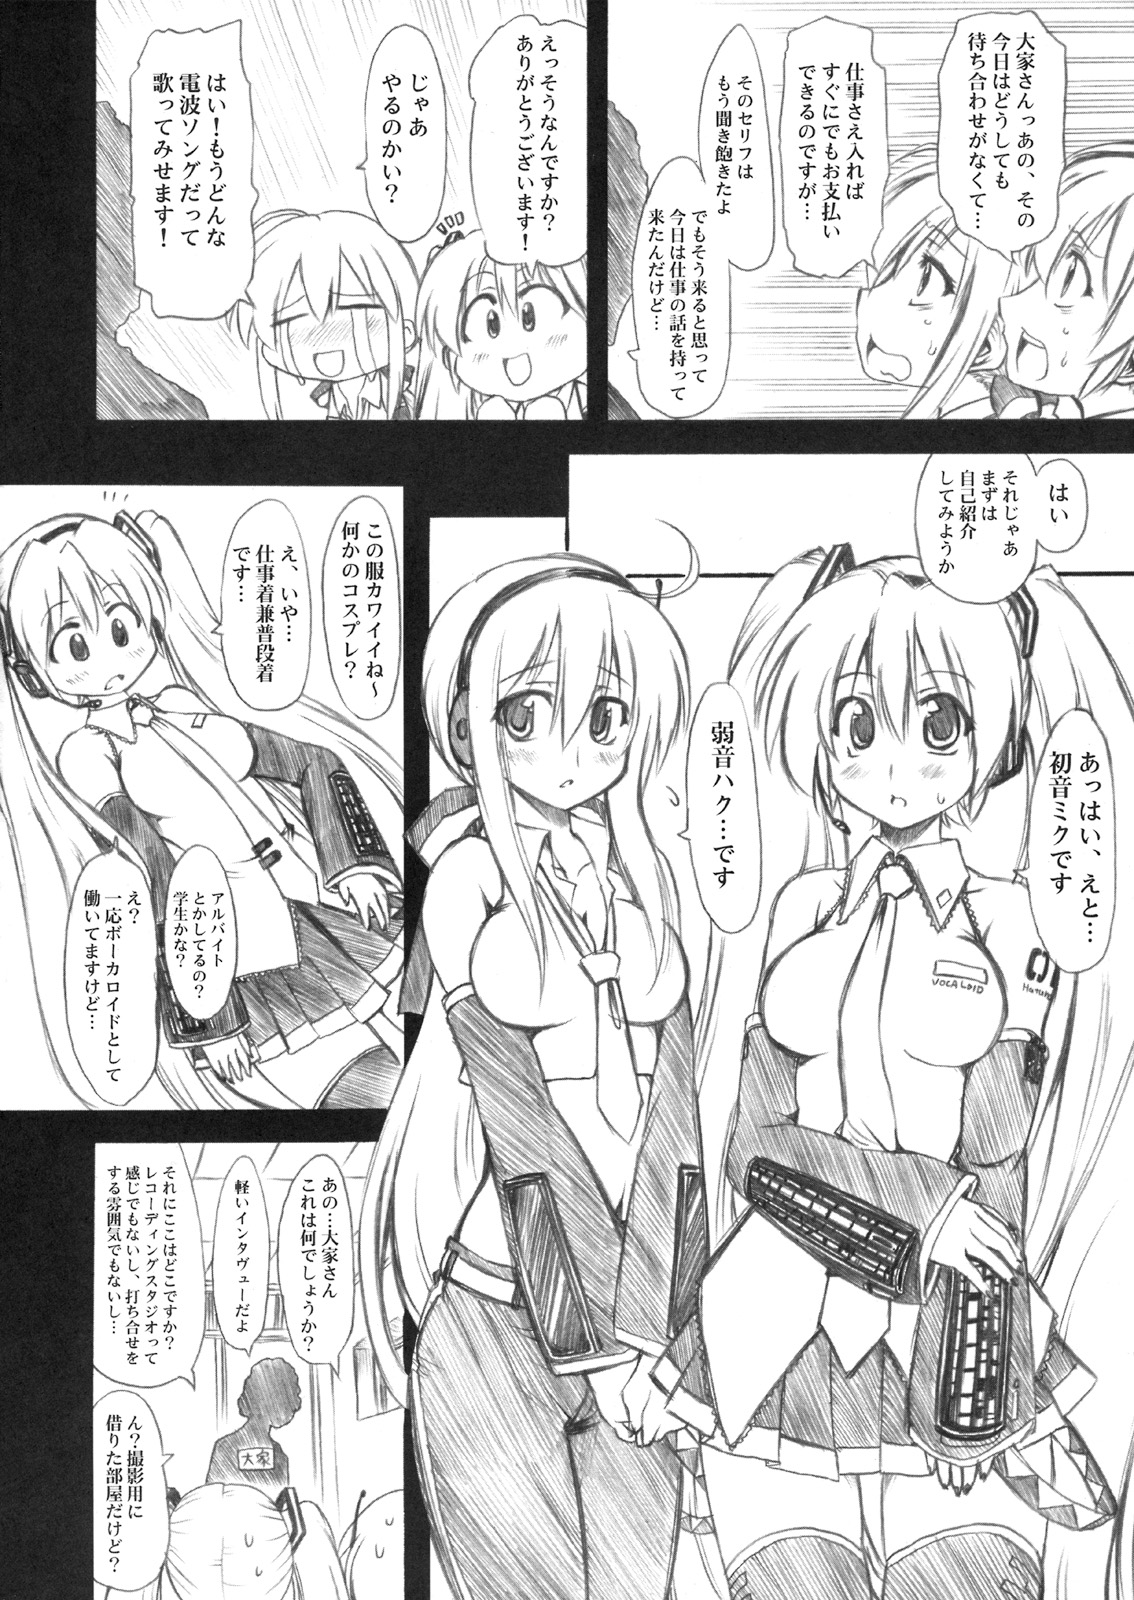 (THE VOC@LOiD M@STER 5) [Chinpudo (Marui)] Sweet Room (Vocaloid) page 5 full